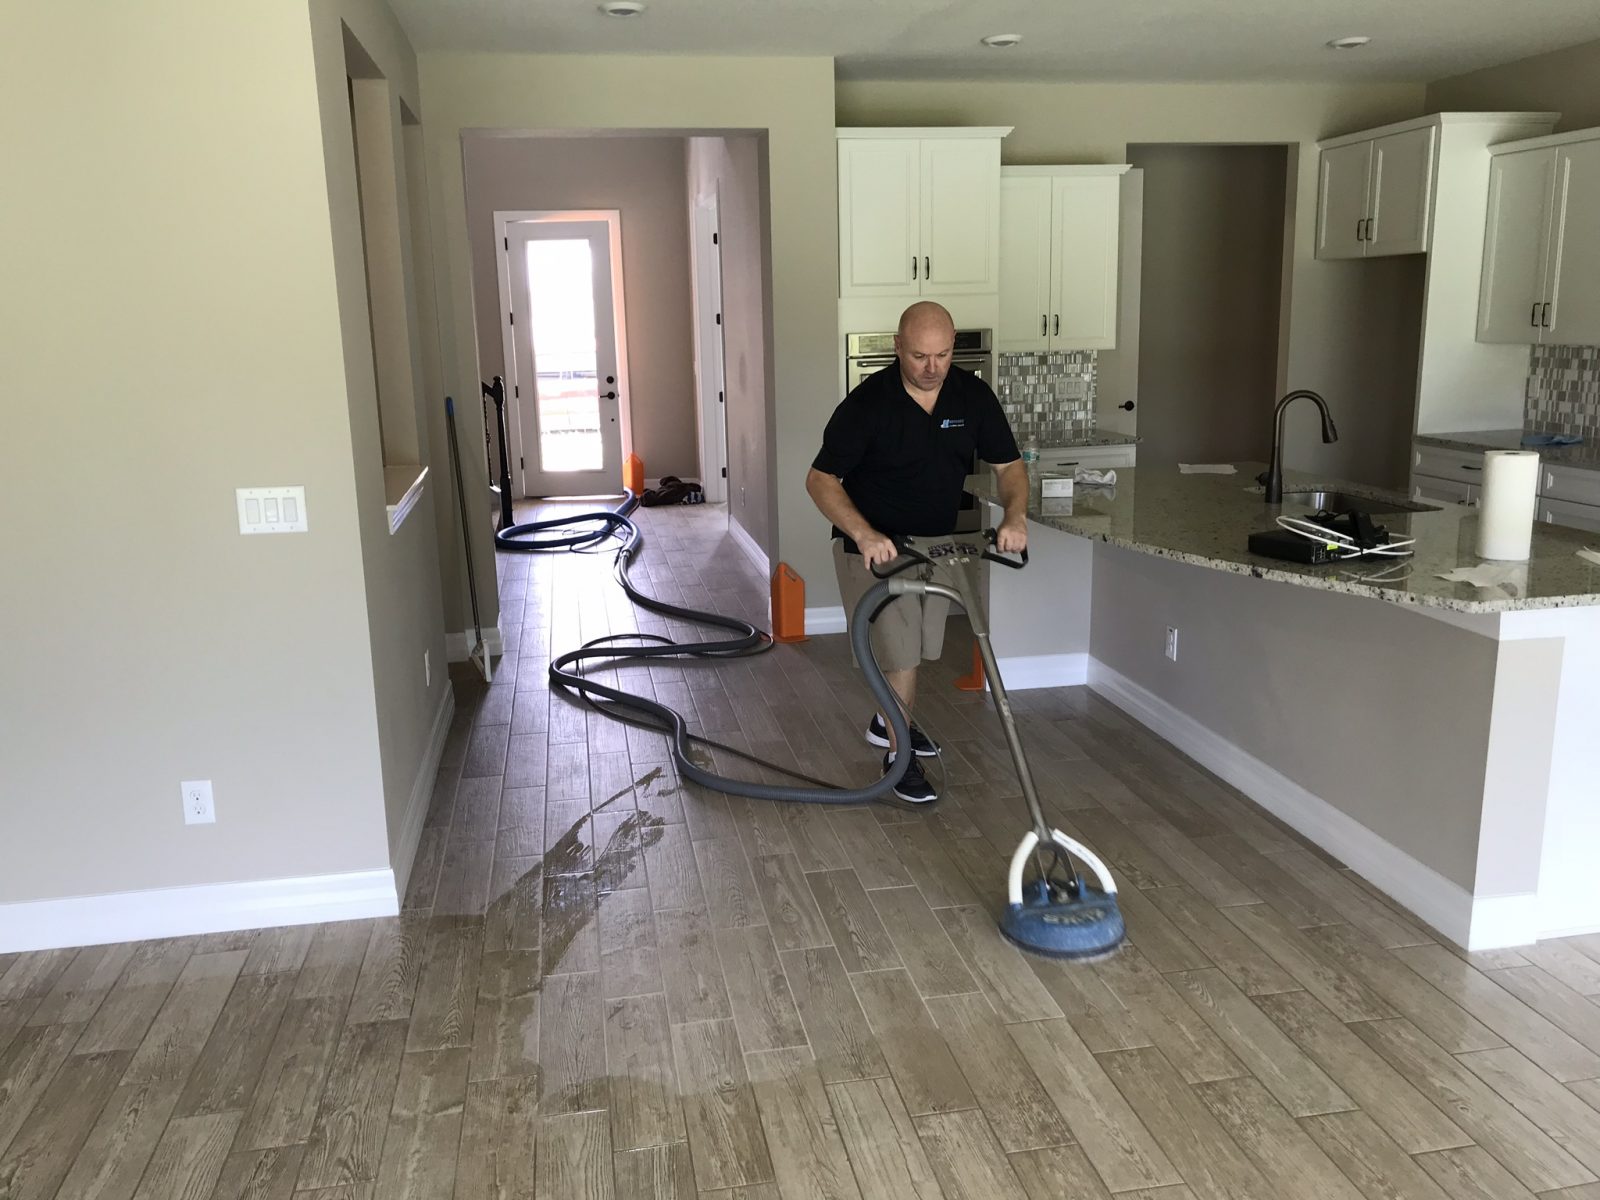 Professional Tile & Grout Cleaning Trinity Florida by Howards Cleaning Service